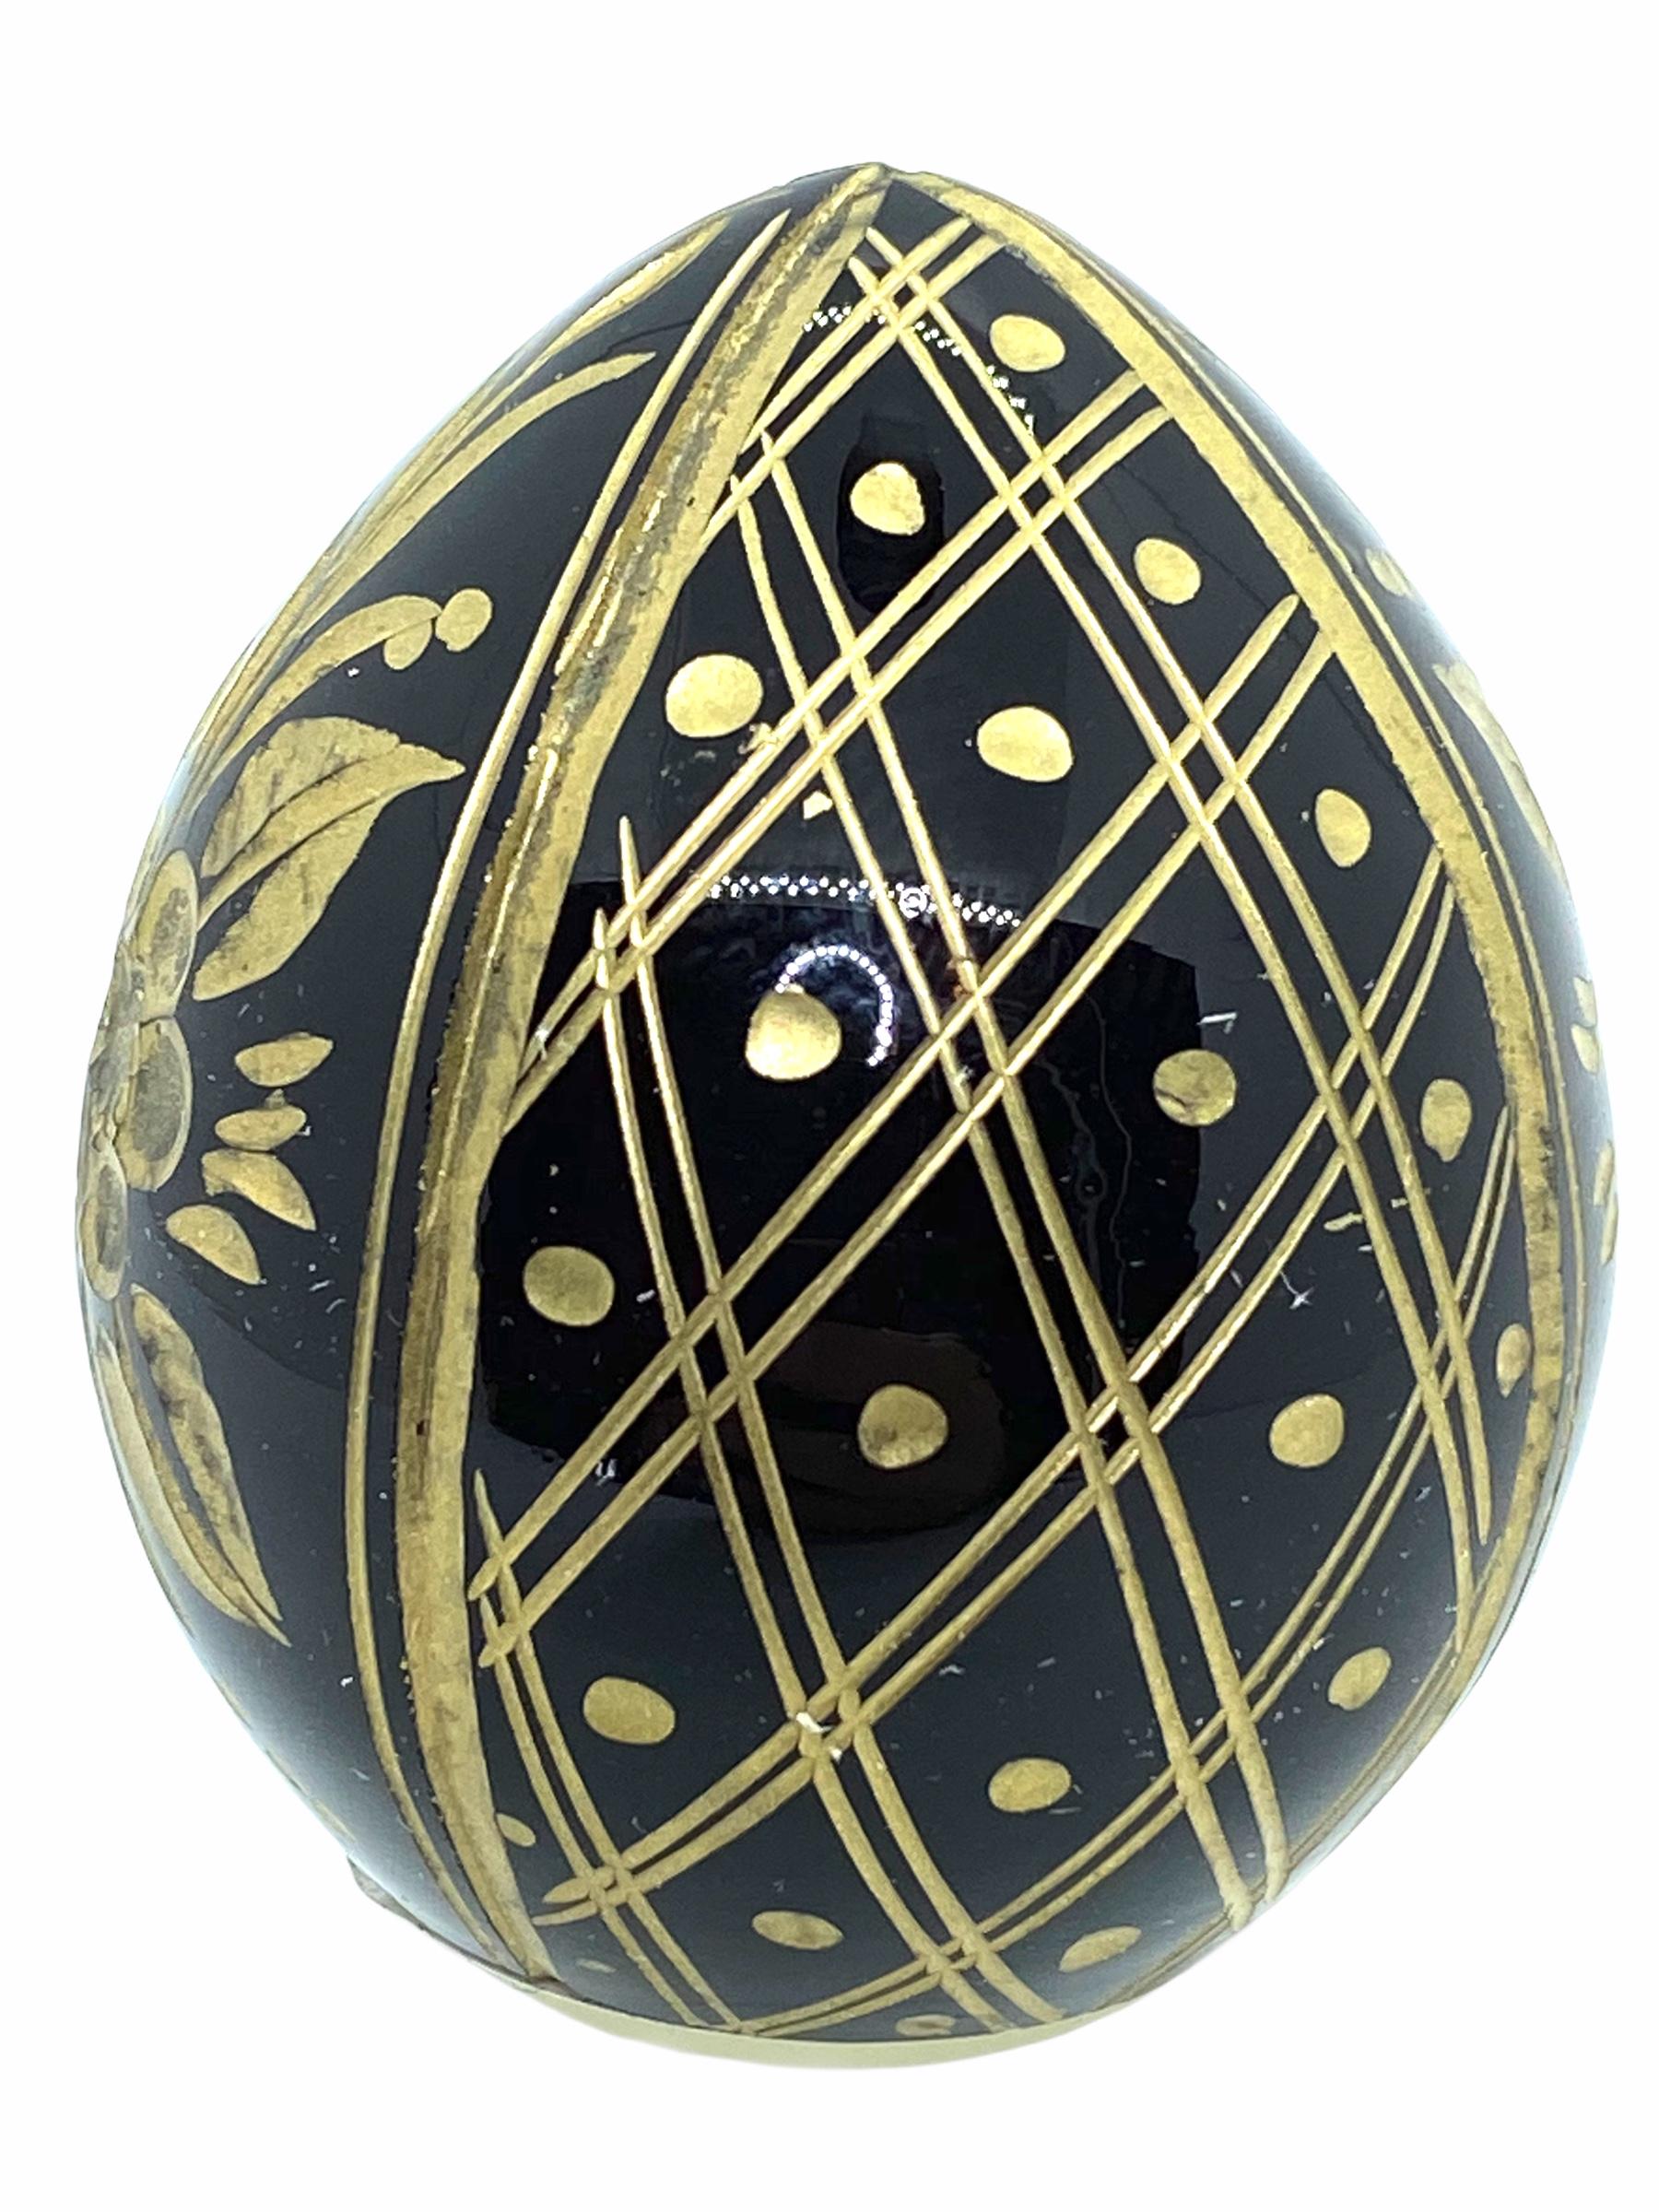 Vintage Faberge style Russia glass egg with etched Russian ornaments and flowers. Reminiscent of eggs from St. Petersburg. Nice addition to your collection or just as decorative piece.